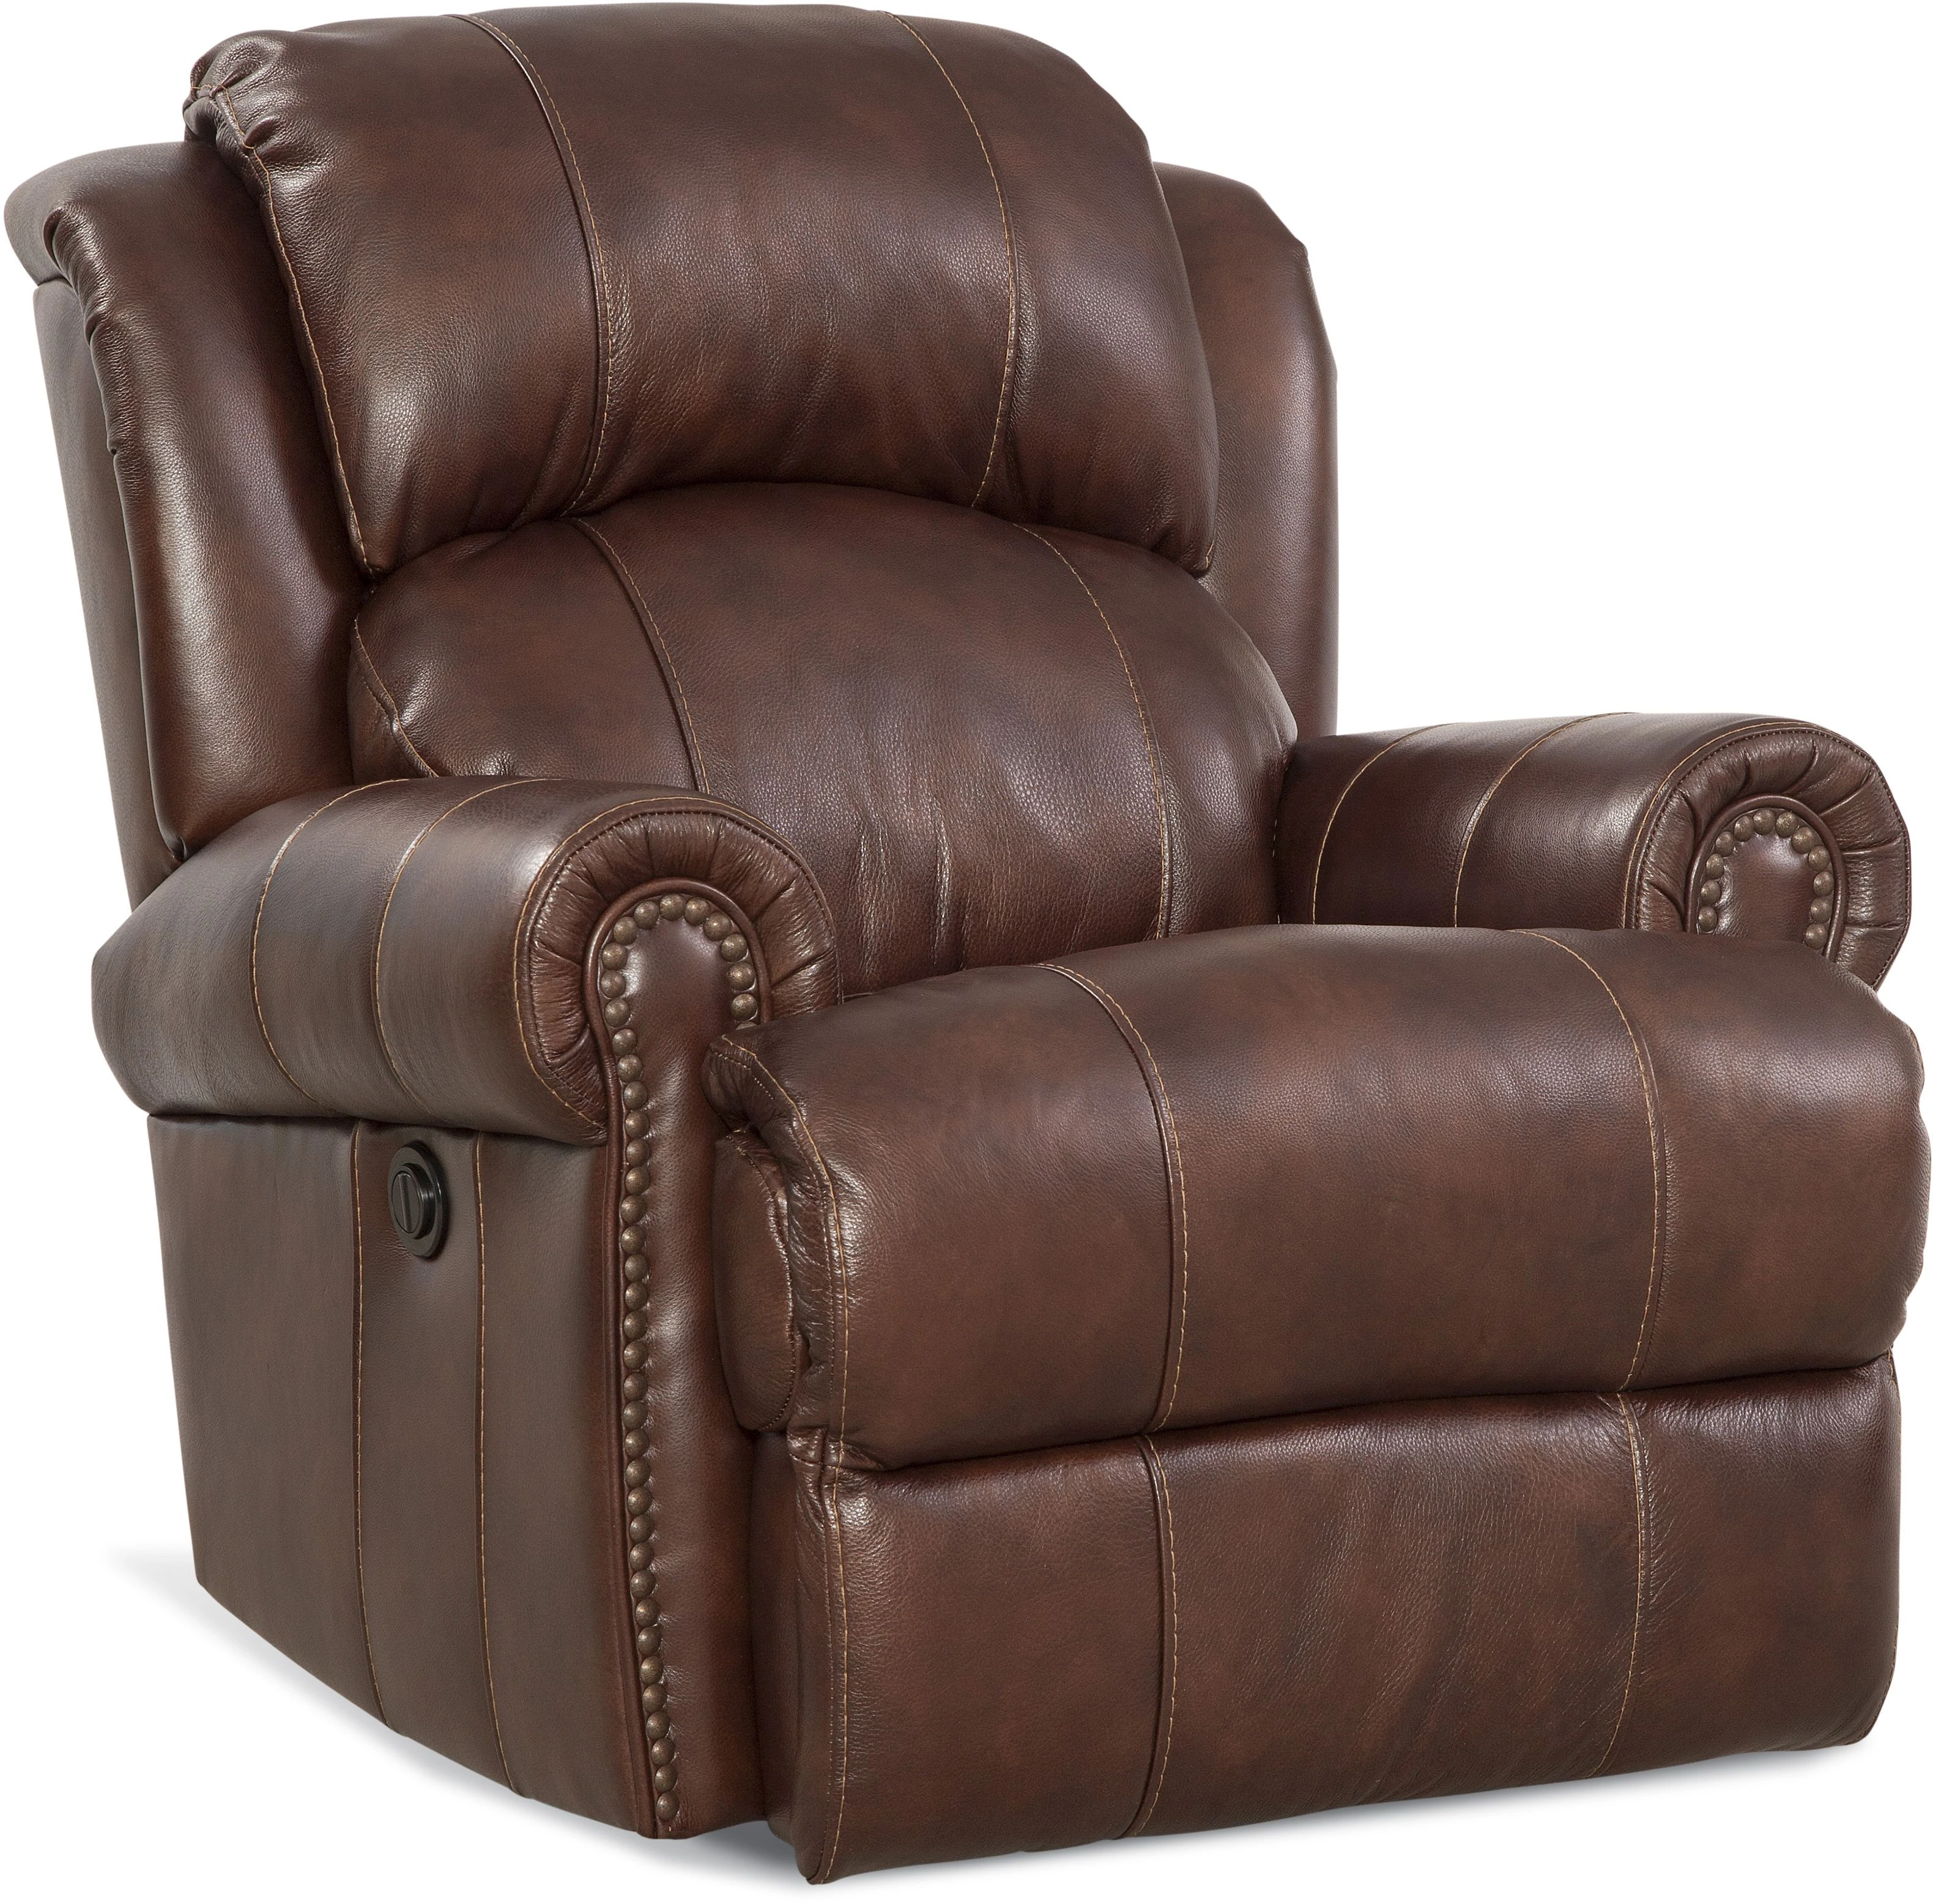 Side view of the HomeStretch Jefferson collection powered rocker recliner 